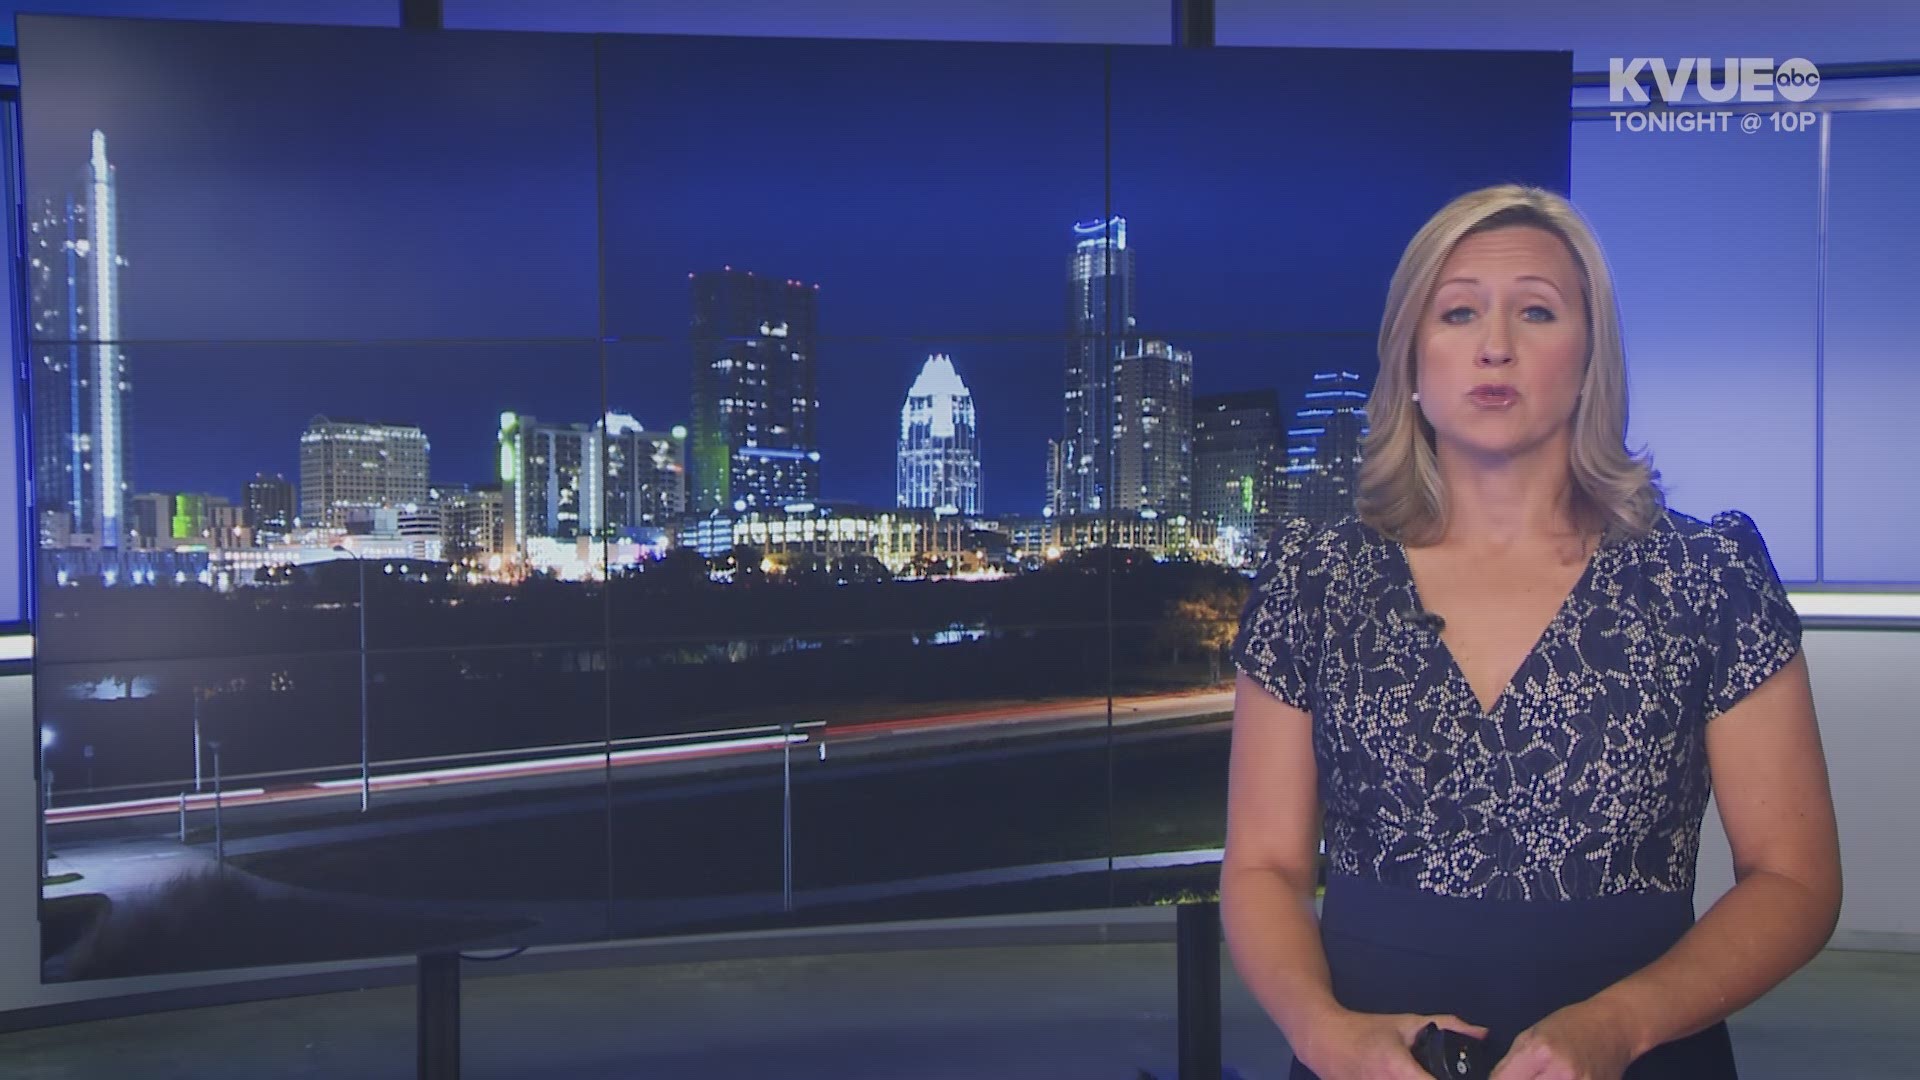 How exactly has this pandemic hurt our community? Find out on KVUE News at 6 p.m. Nov. 12.